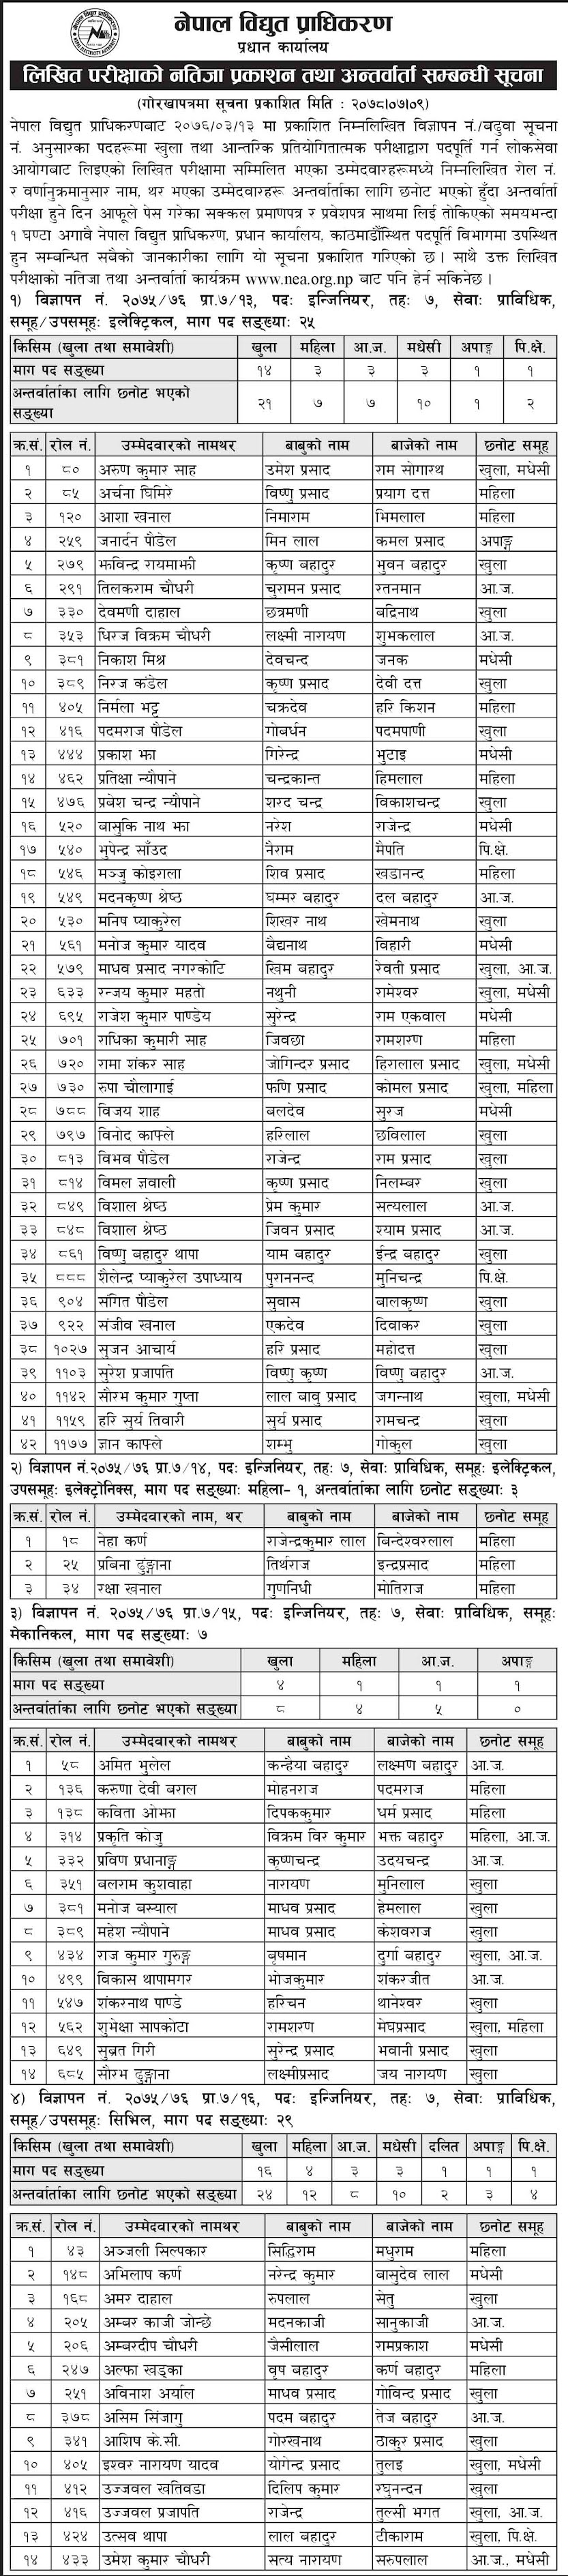 Result Of NEA (Nepal Electricity Authority)